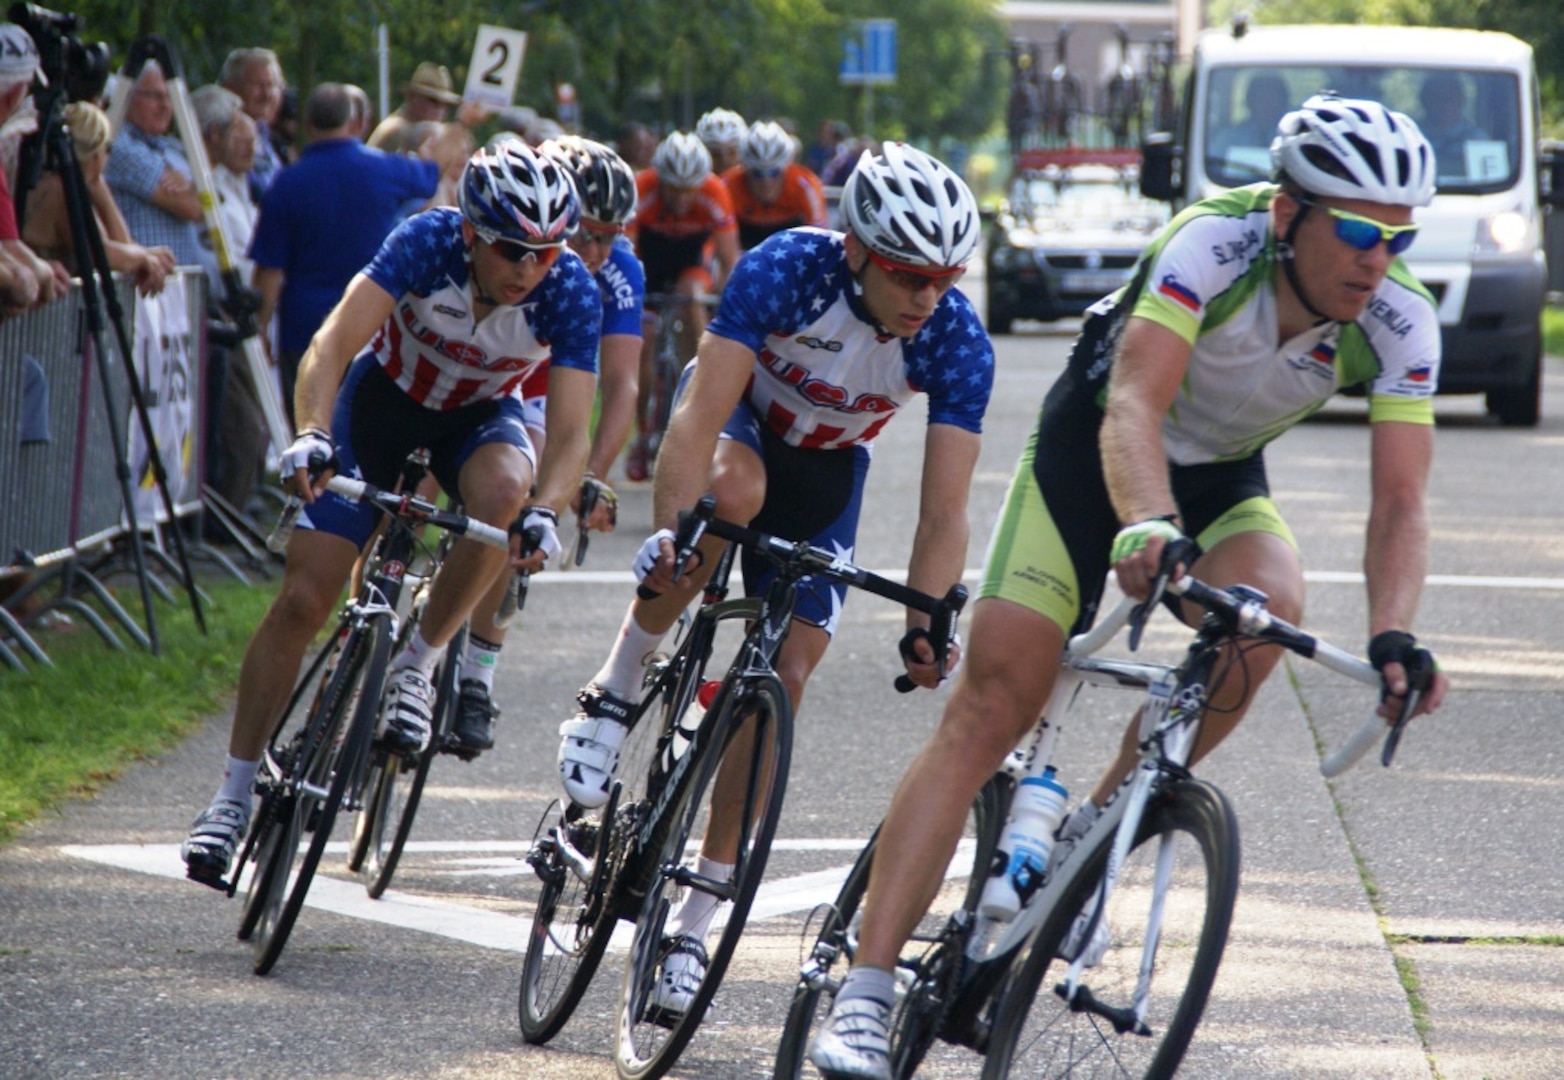 Left to Right:  SSgt Dwayne Farr (Air Force) and 1st Lt Jay ShalekBriski (Air Force) on the mens road race course competing in the 2013 CISM World Military Cycling Championship 2-6 September in Leopoldsburg, Belgium.  